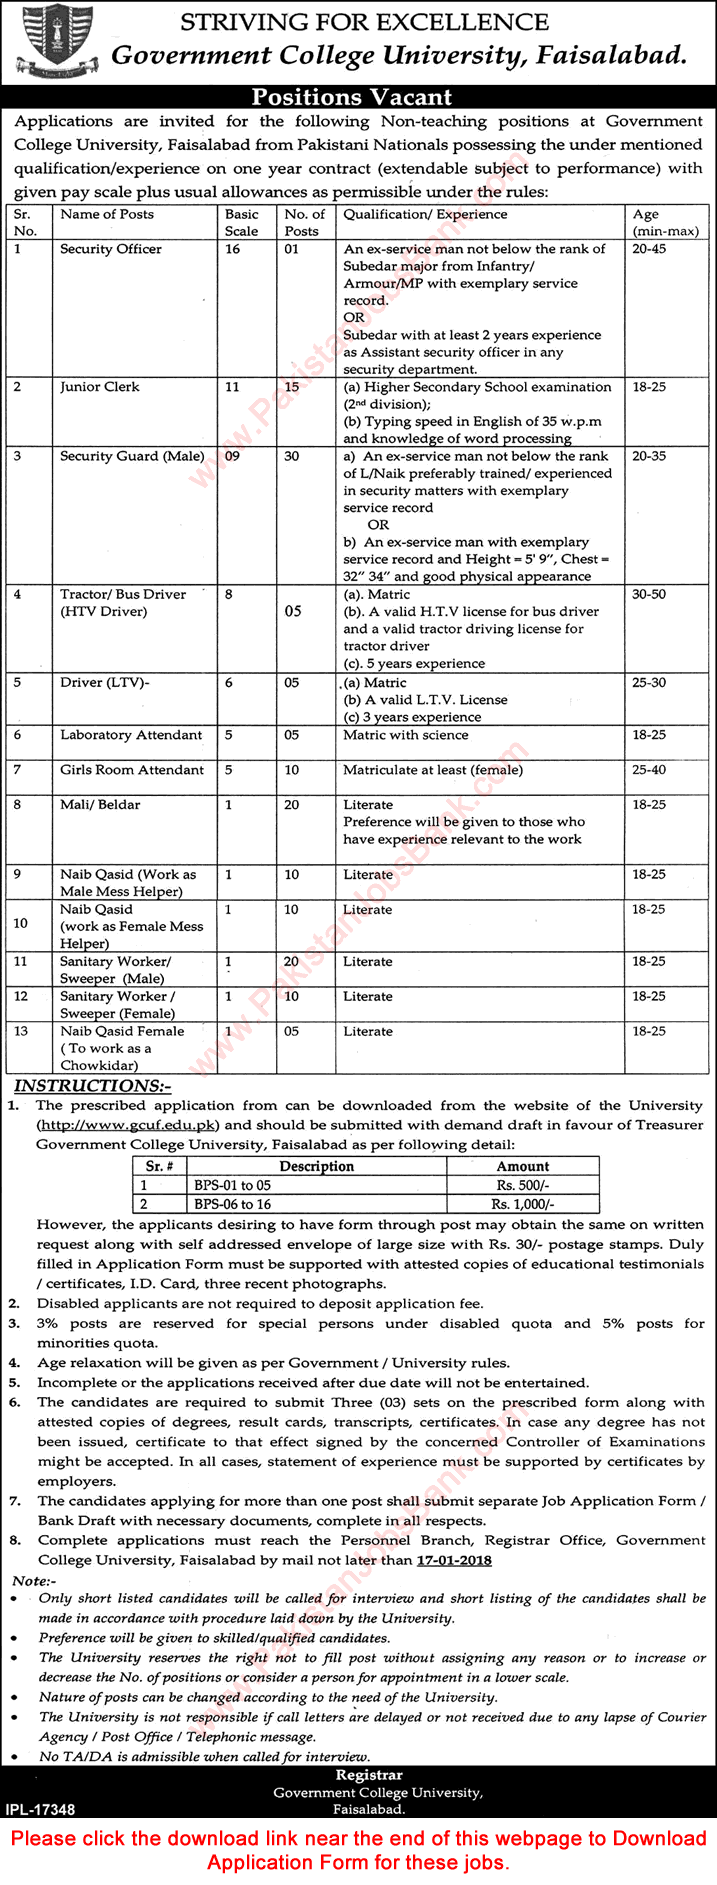 GC University Faisalabad Jobs December 2017 / 2018 Application Form Clerks, Security Guards & Others Latest